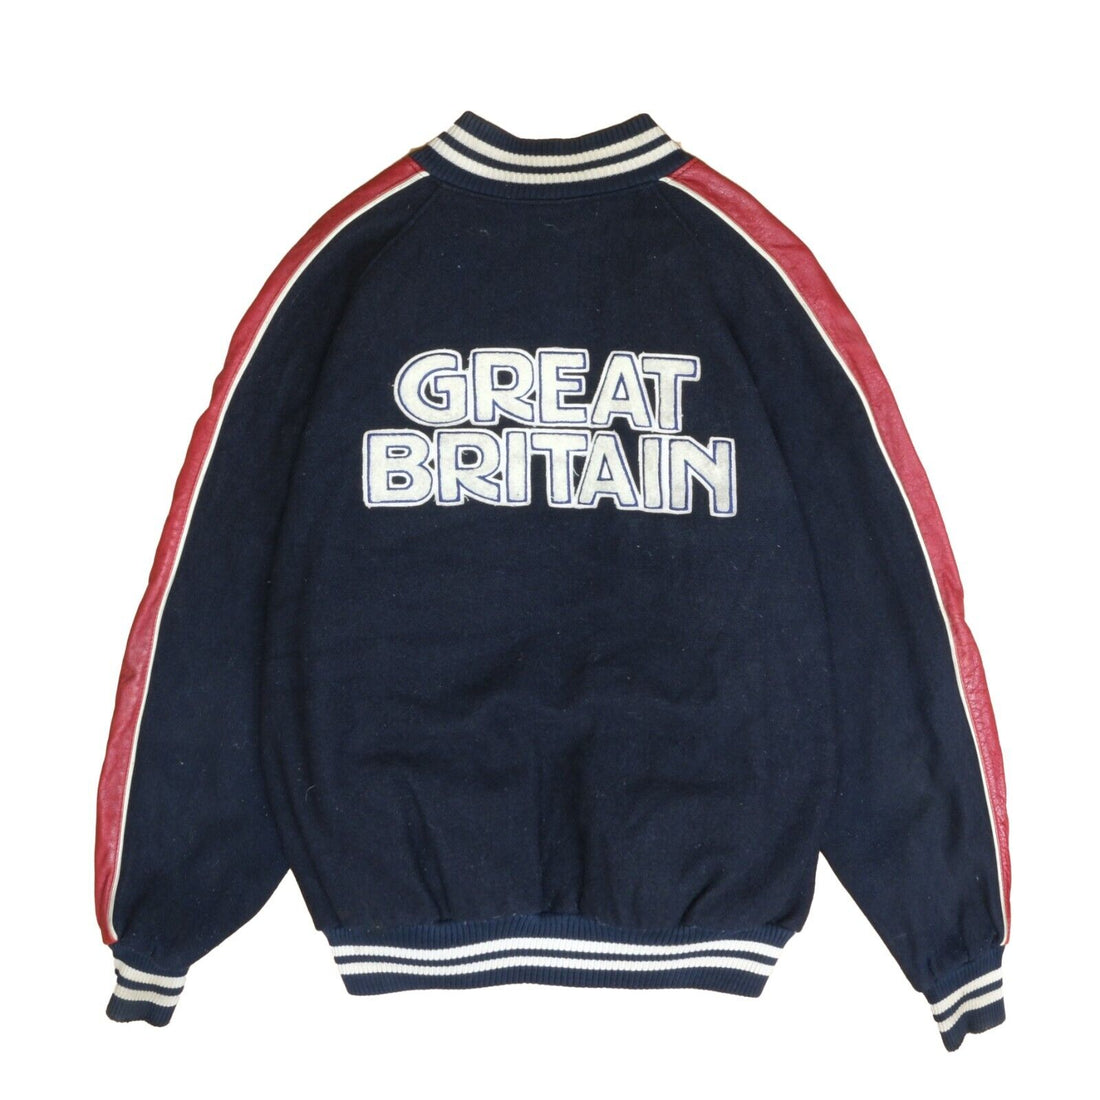 Vintage Great Britain Roots Leather Wool Varsity Jacket Size 2XL